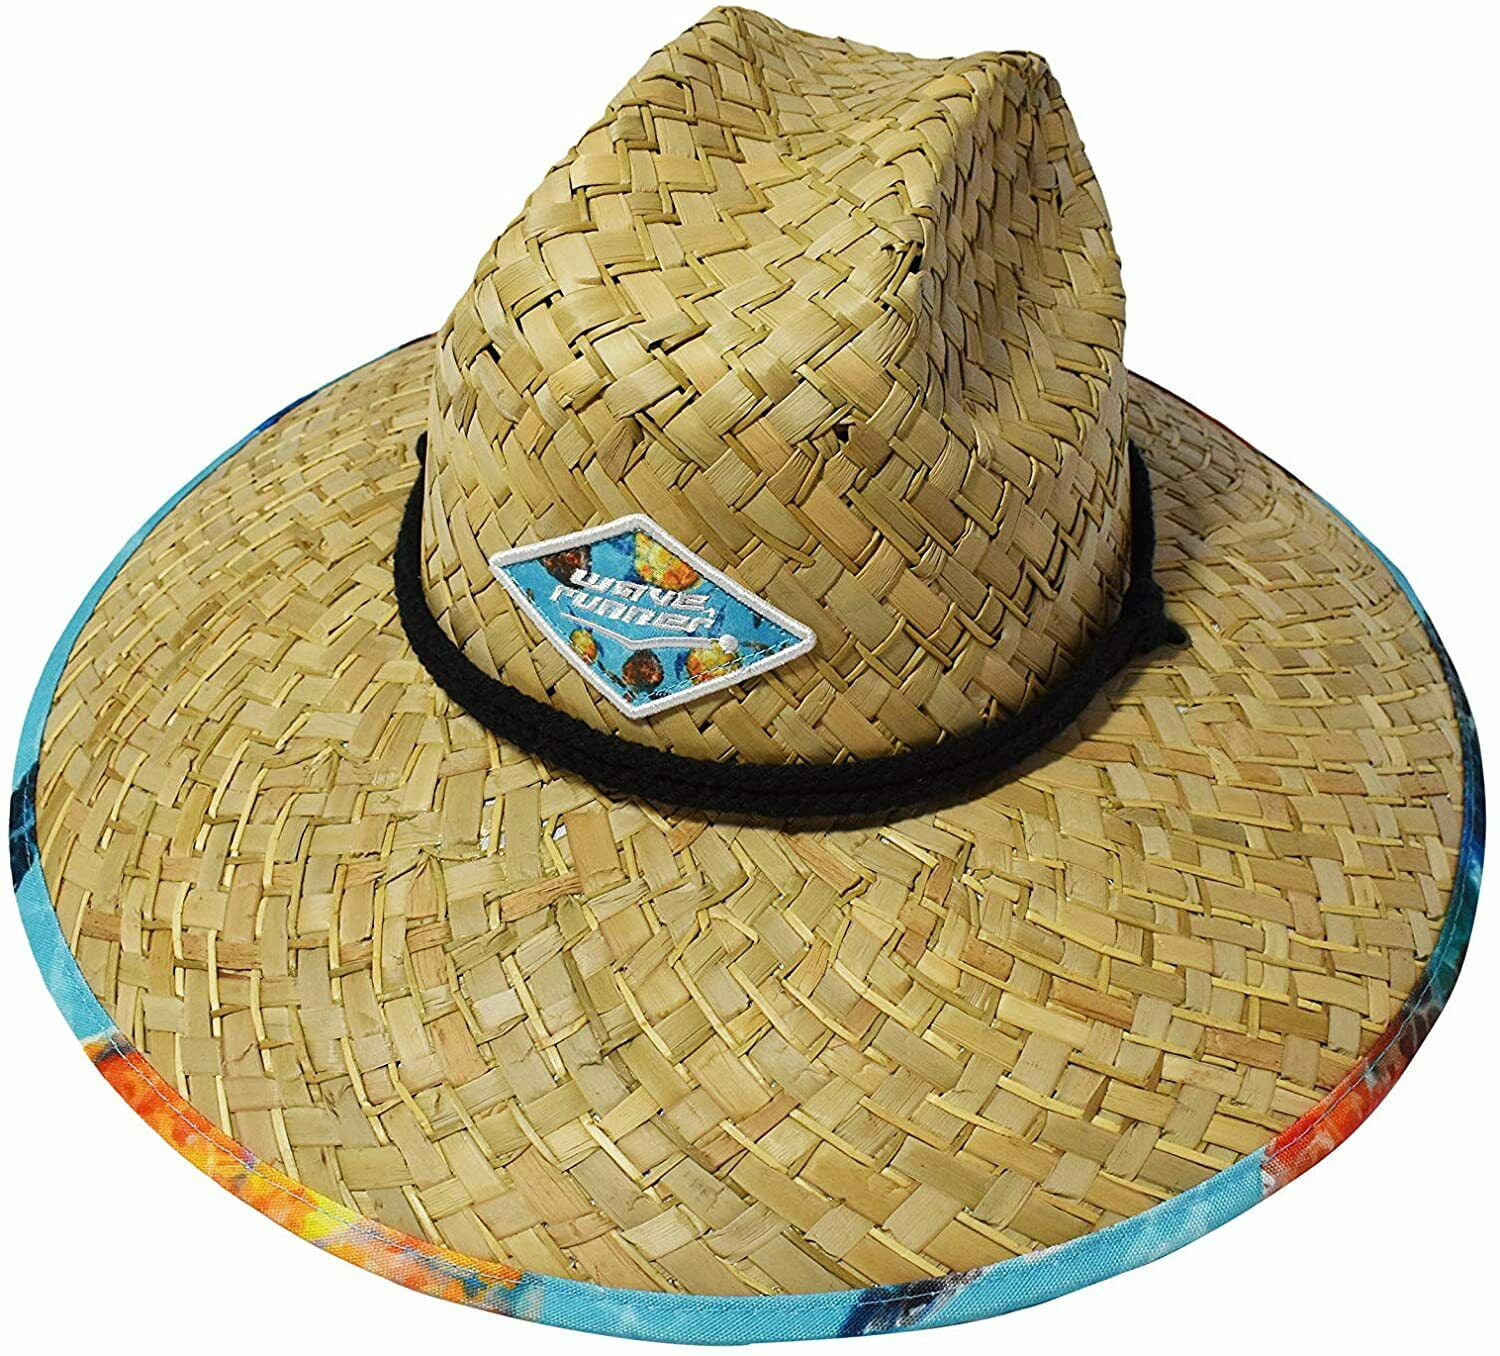 Mens straw hat sun protection classic wide-brimmed lifeguard sun straw hat UPF 50+ suitable for summer mens straw beach hat